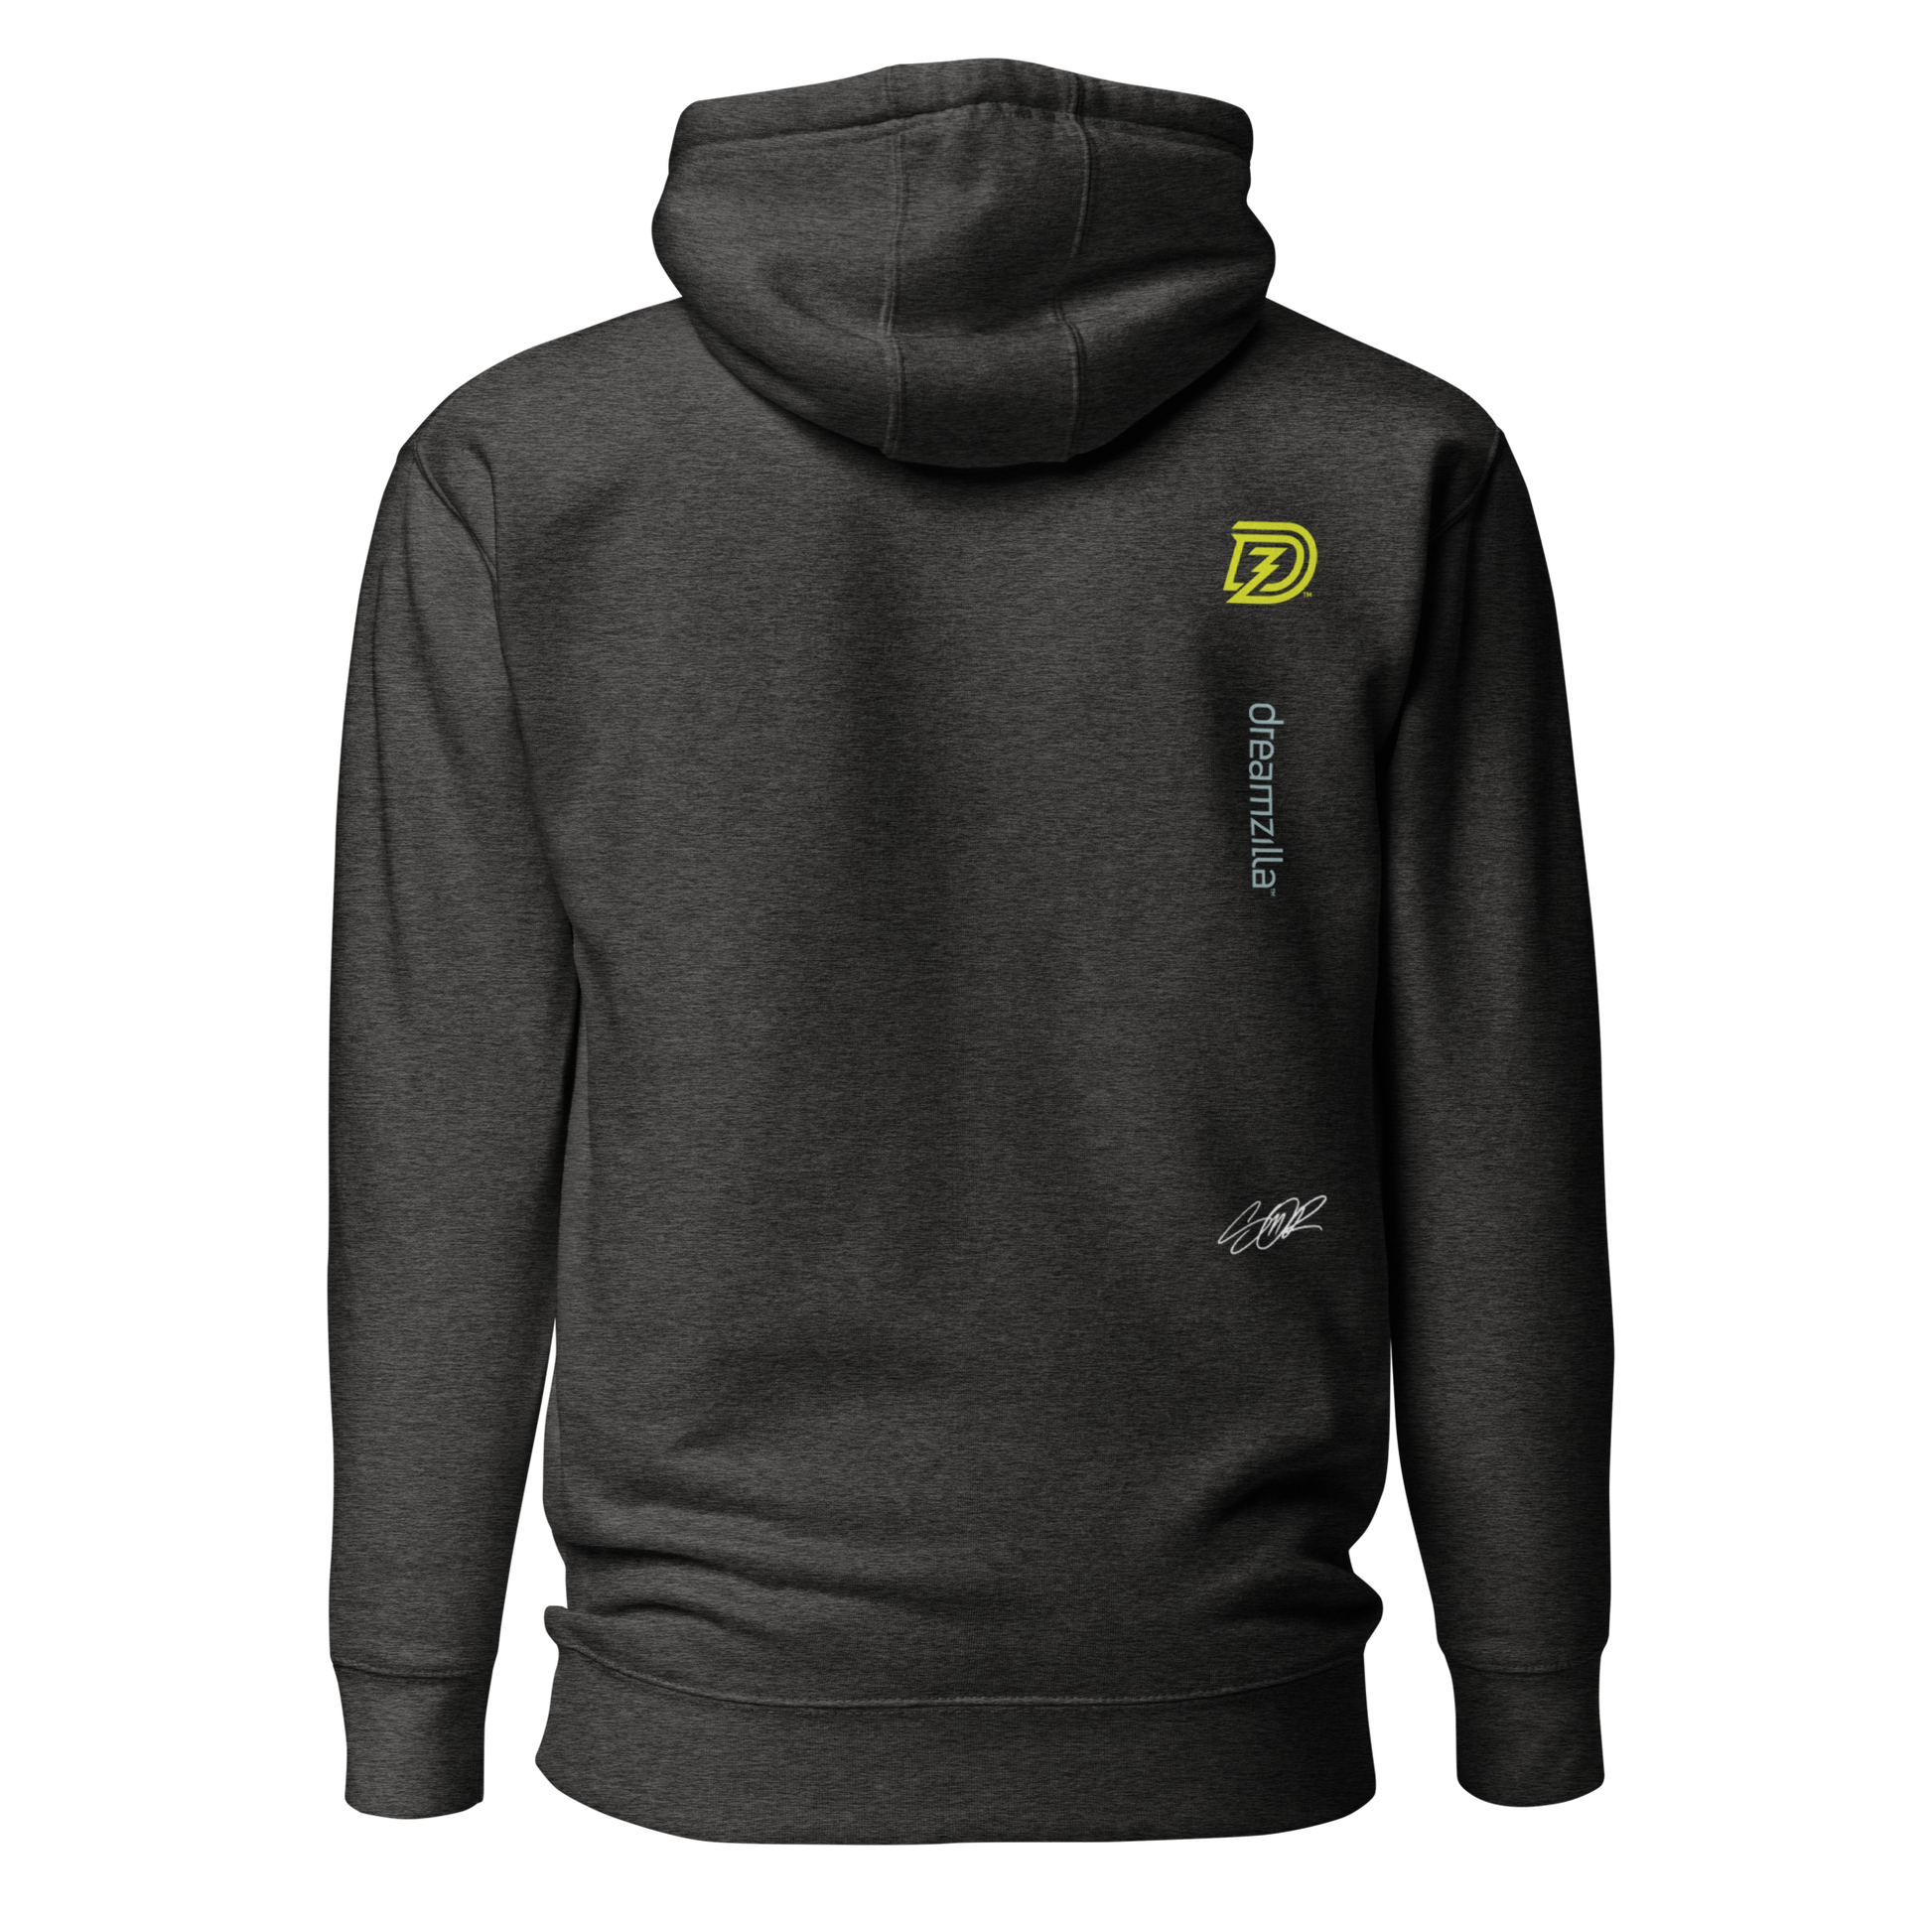 Back of Graffiti Wildstyle 2 by Sanitor Unisex Hoodie in Charcoal Heather